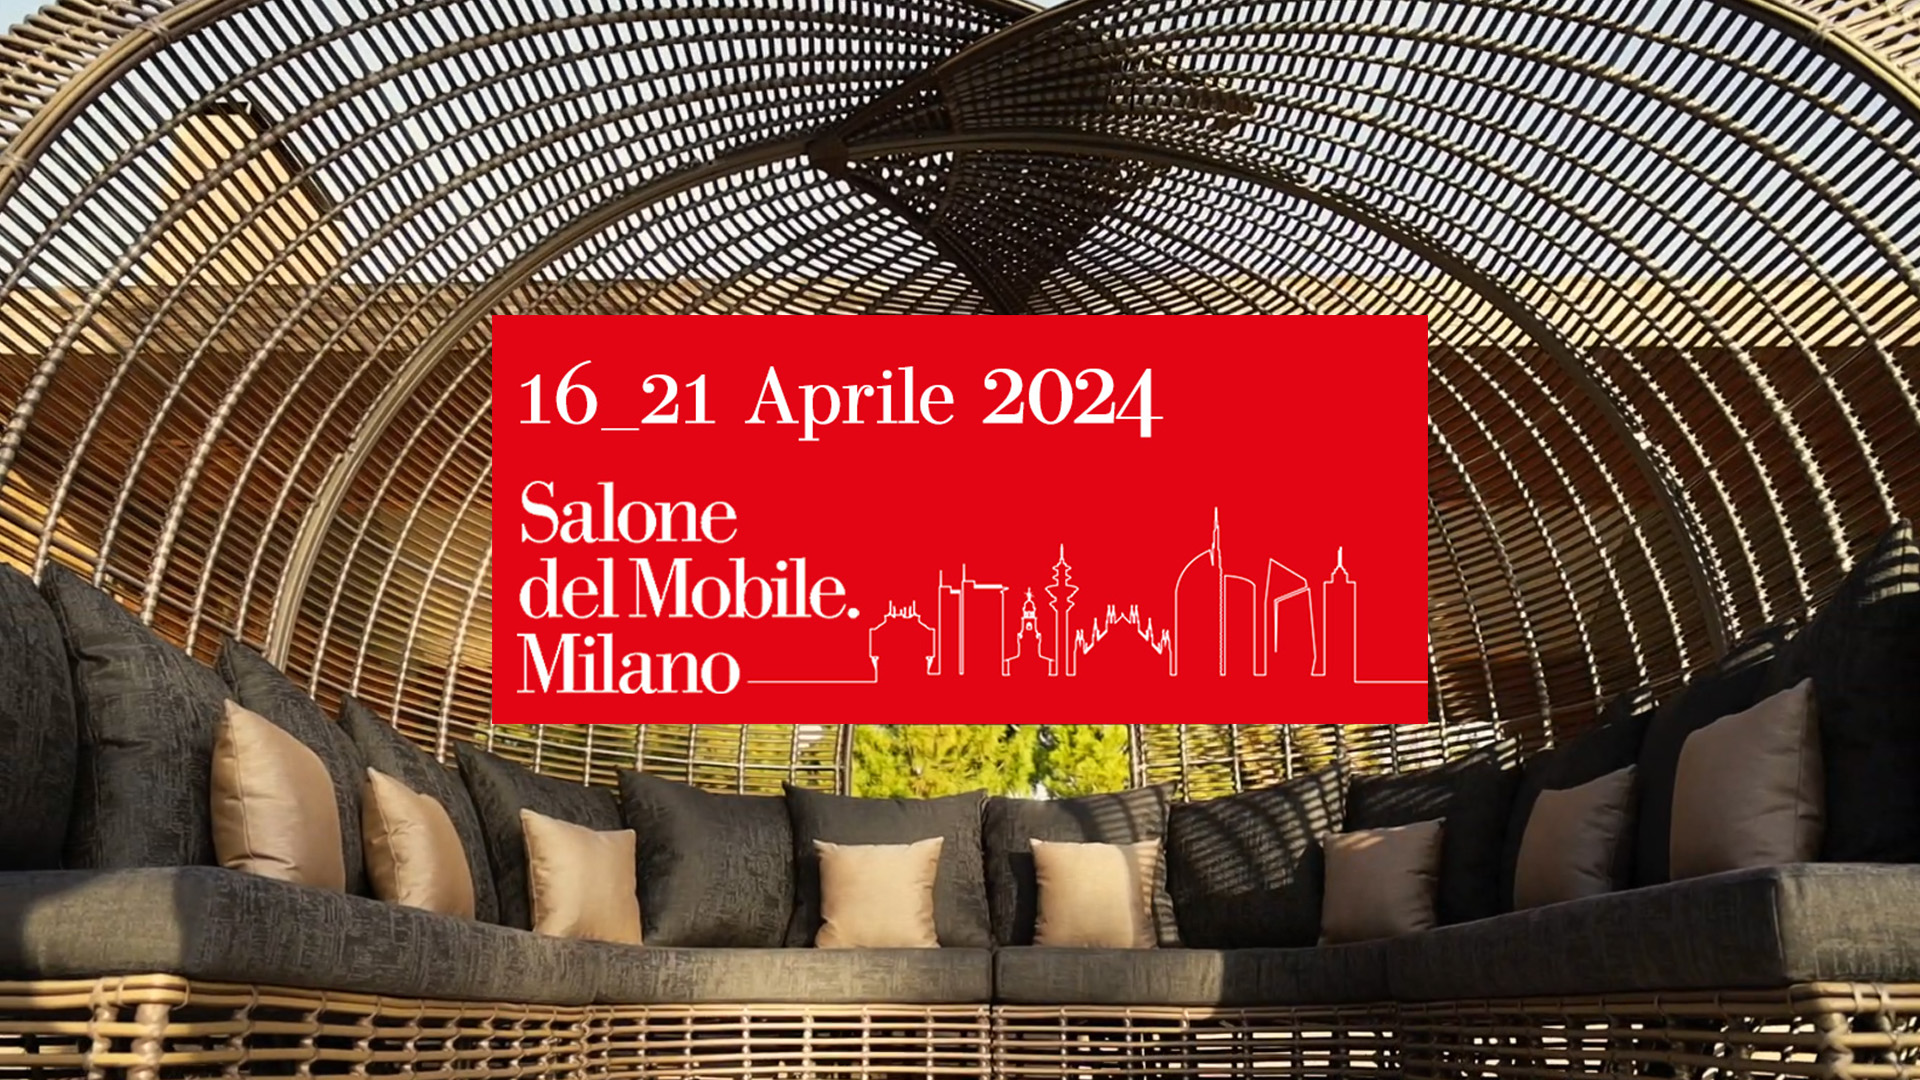 05.04.2024 Skyline Design at Salone del Mobile 2024: Innovating Outdoor Spaces